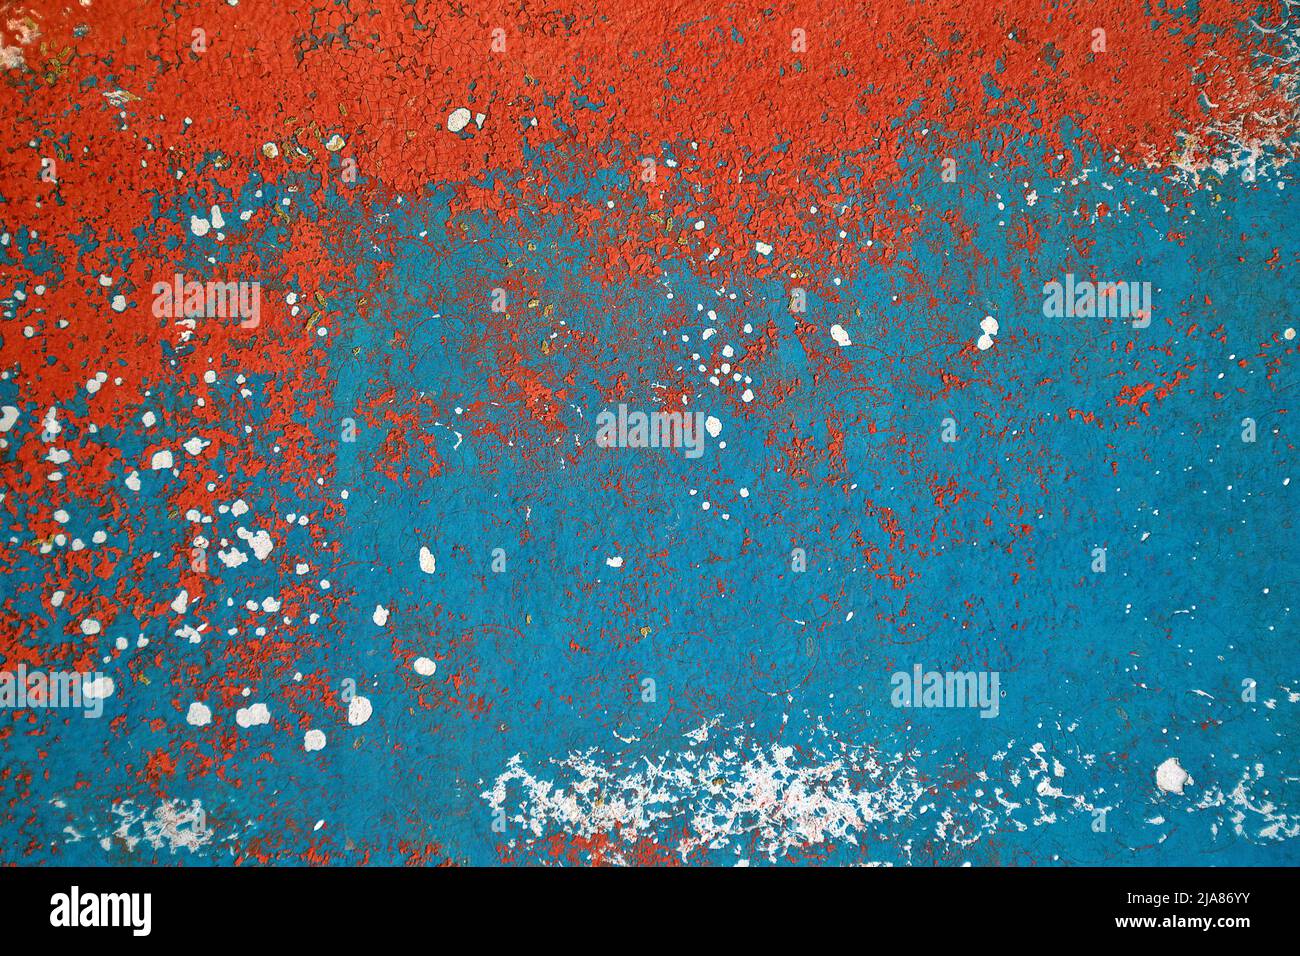 Orange and turquoise distressed paint abstract with white chips Stock Photo